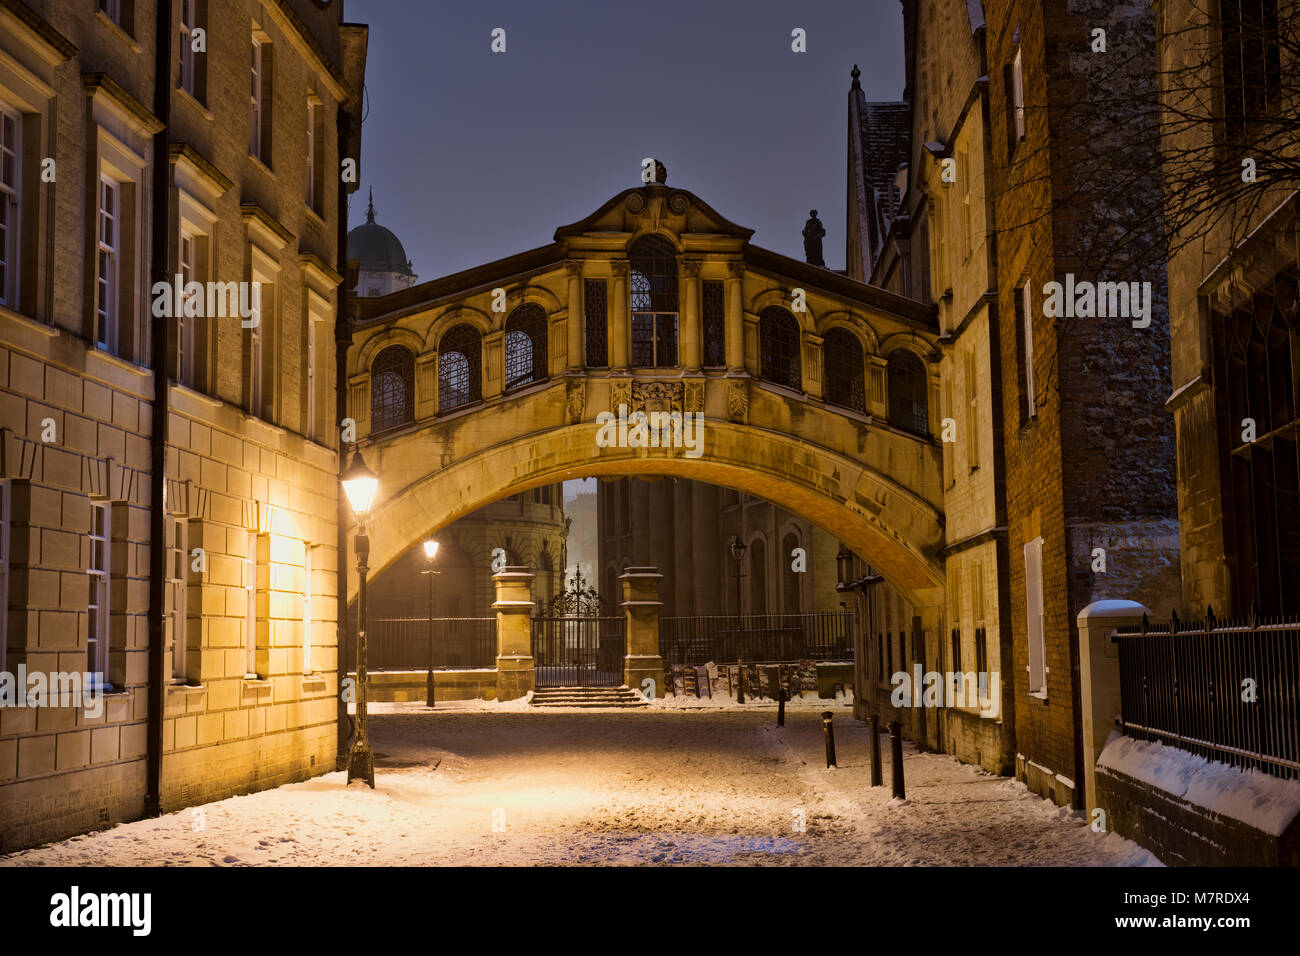 Bridge of Sighs. Hertford bridge in the snow early morning before dawn. Oxford, Oxfordshire, England Stock Photo